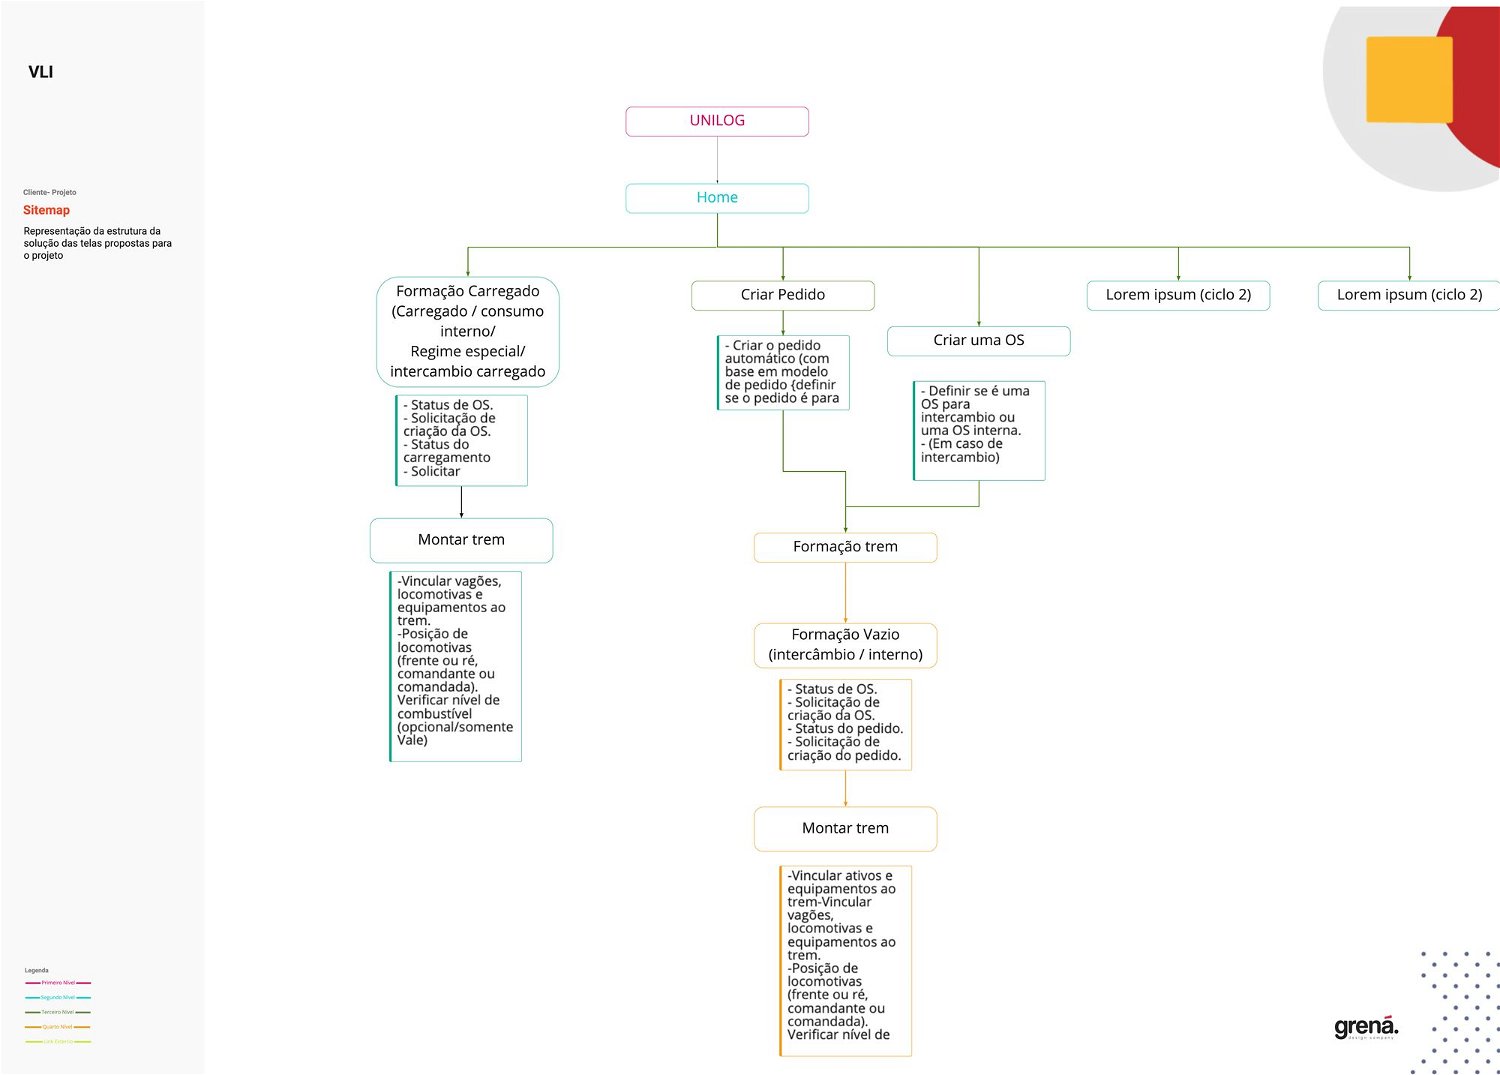 Sitemap for the new system